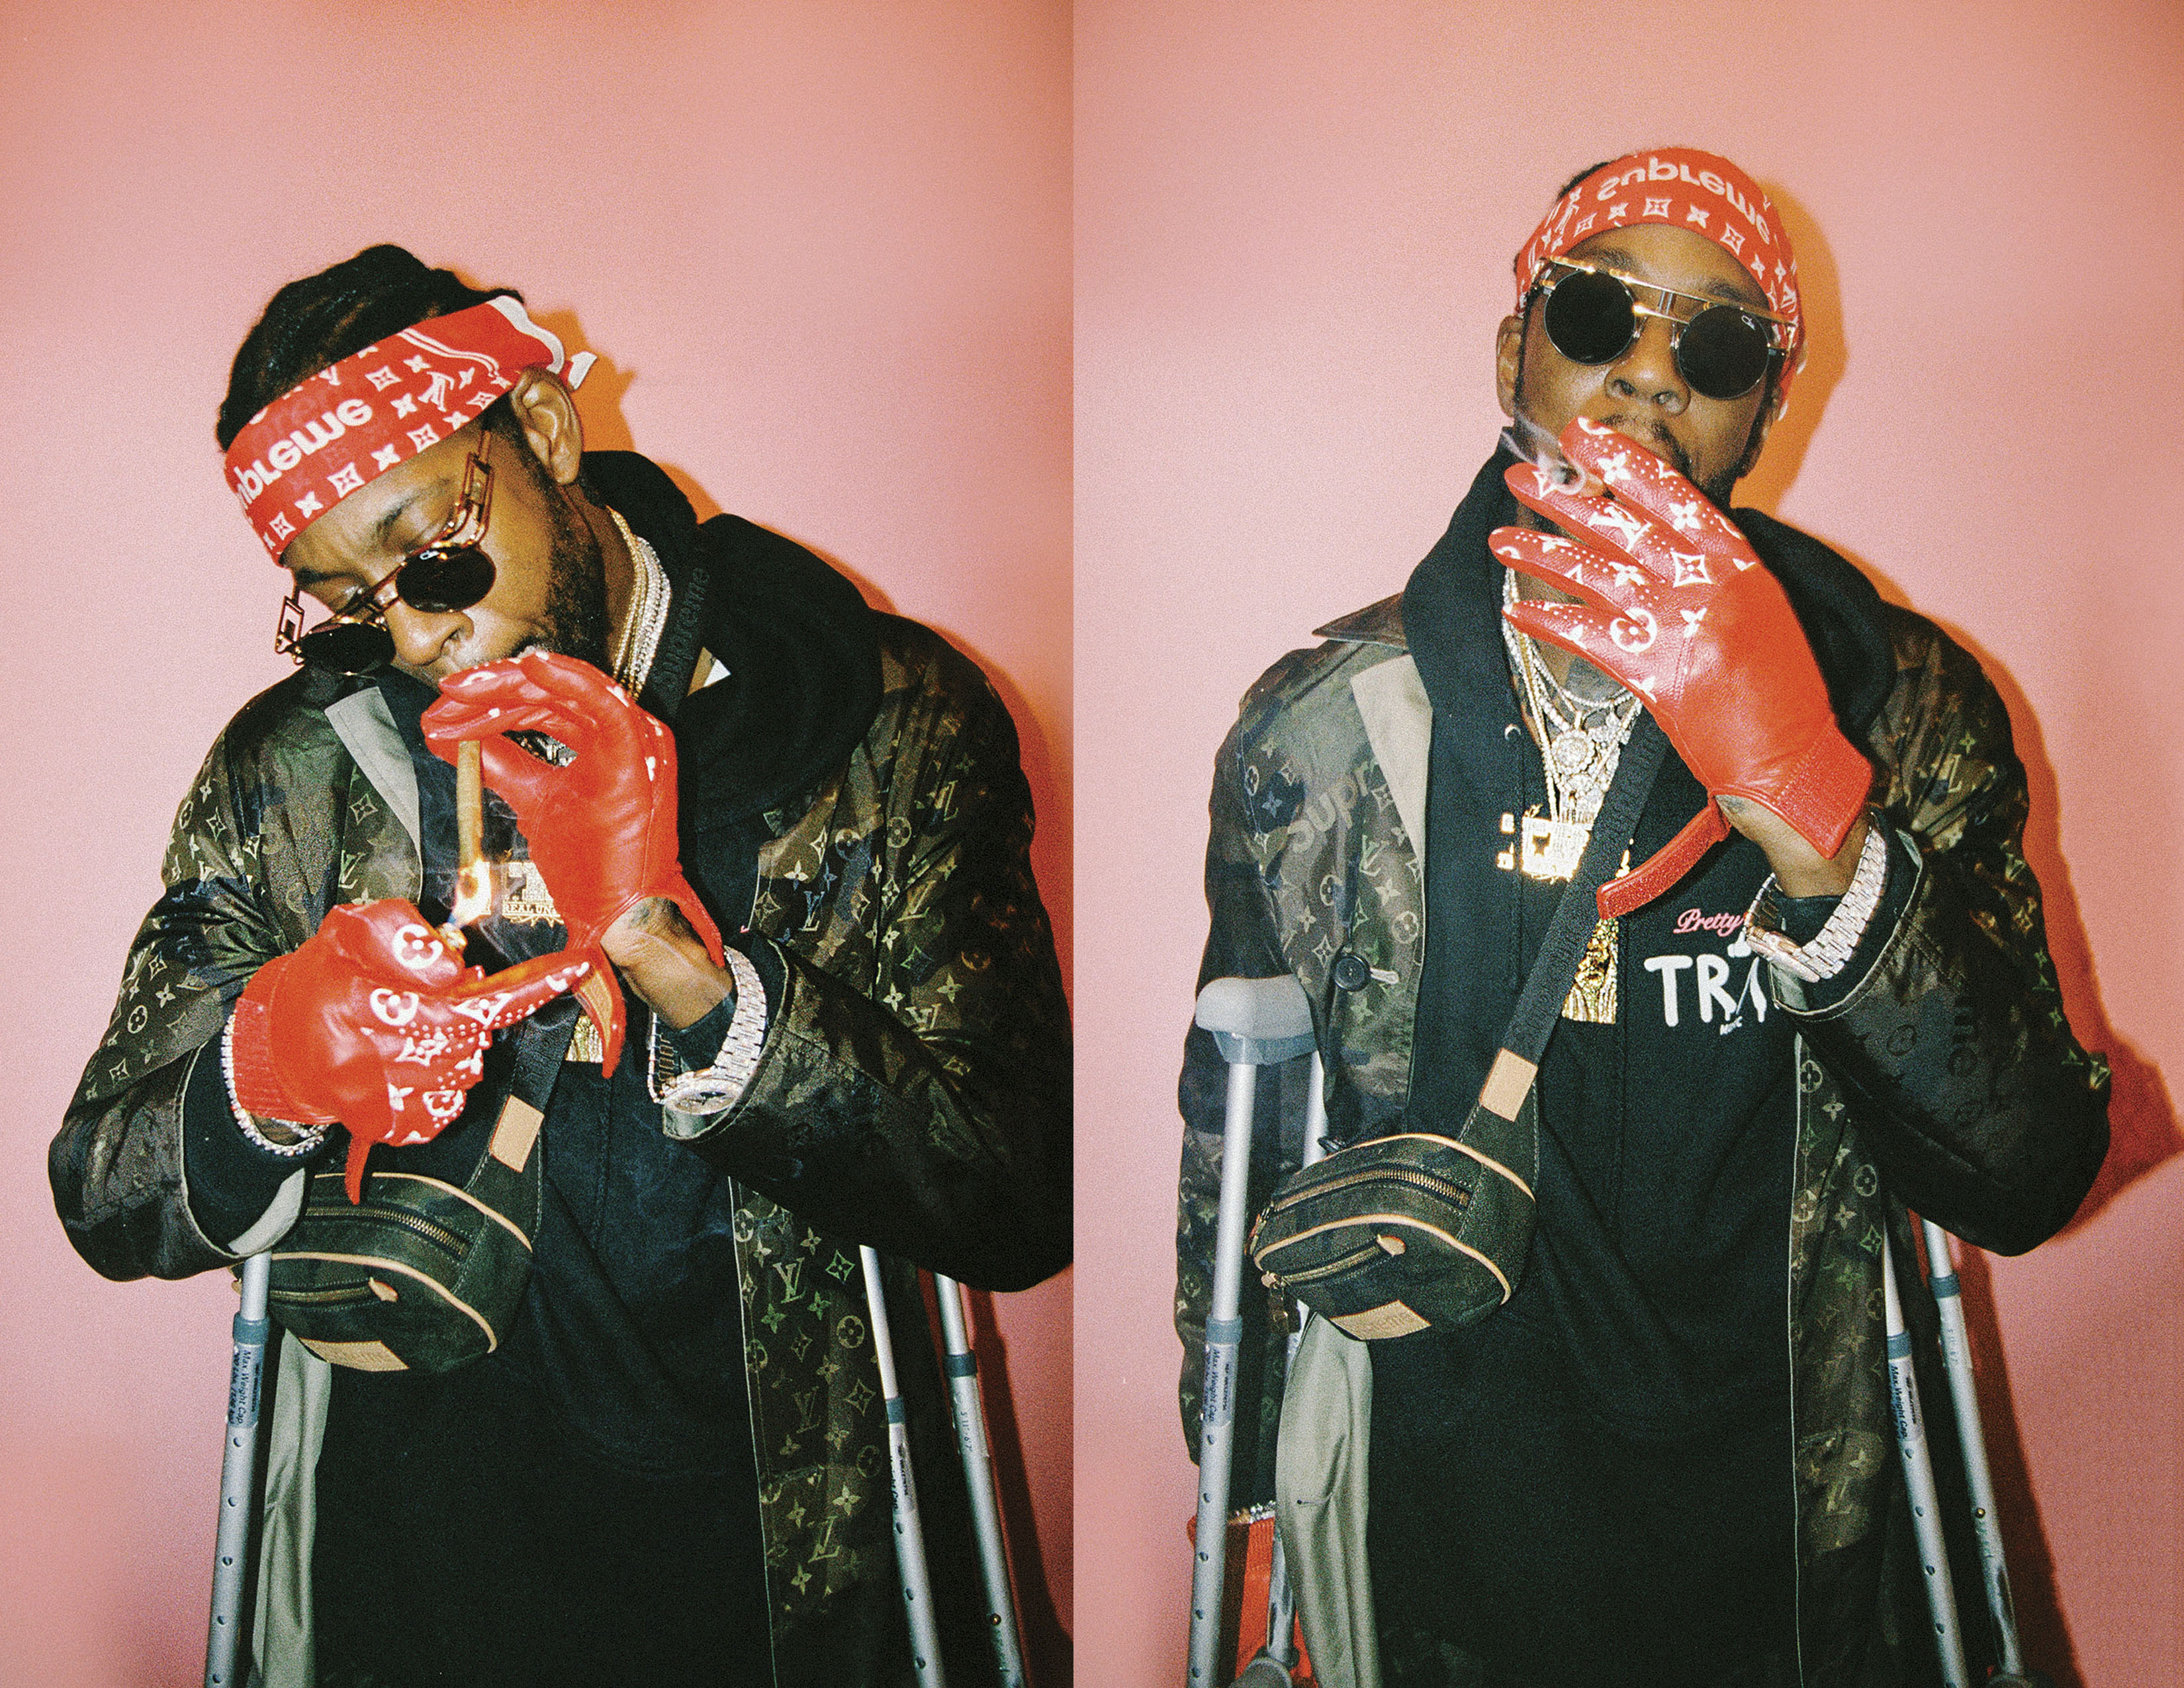 Tity Boi (2 Chainz) on X: Trappy S. Goyard What you think the 'S' stand  for? #nationalpuppyday  / X